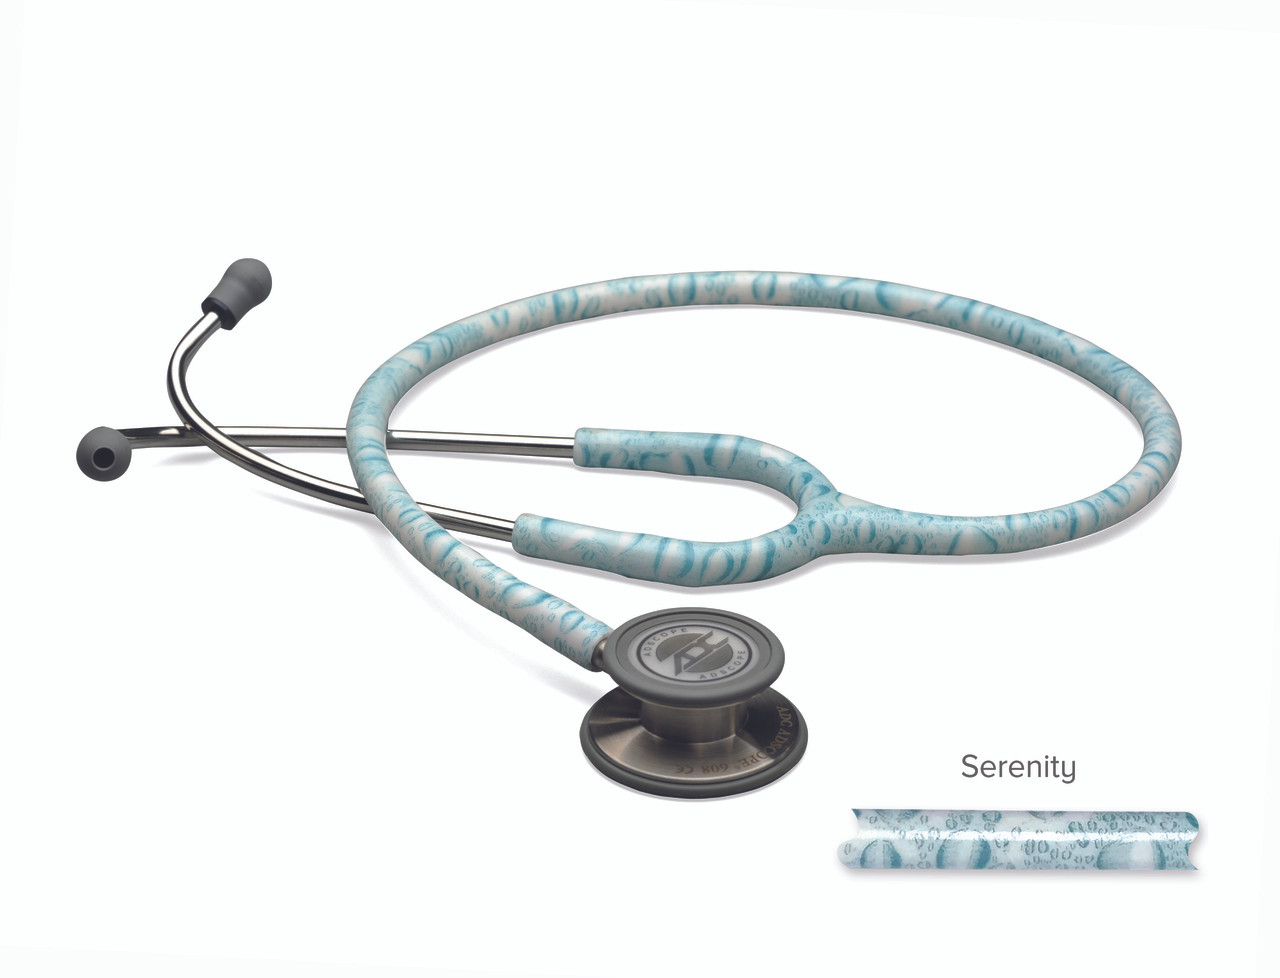 ADC Adscope 608 Serenity Convertible Clinician Stethoscope